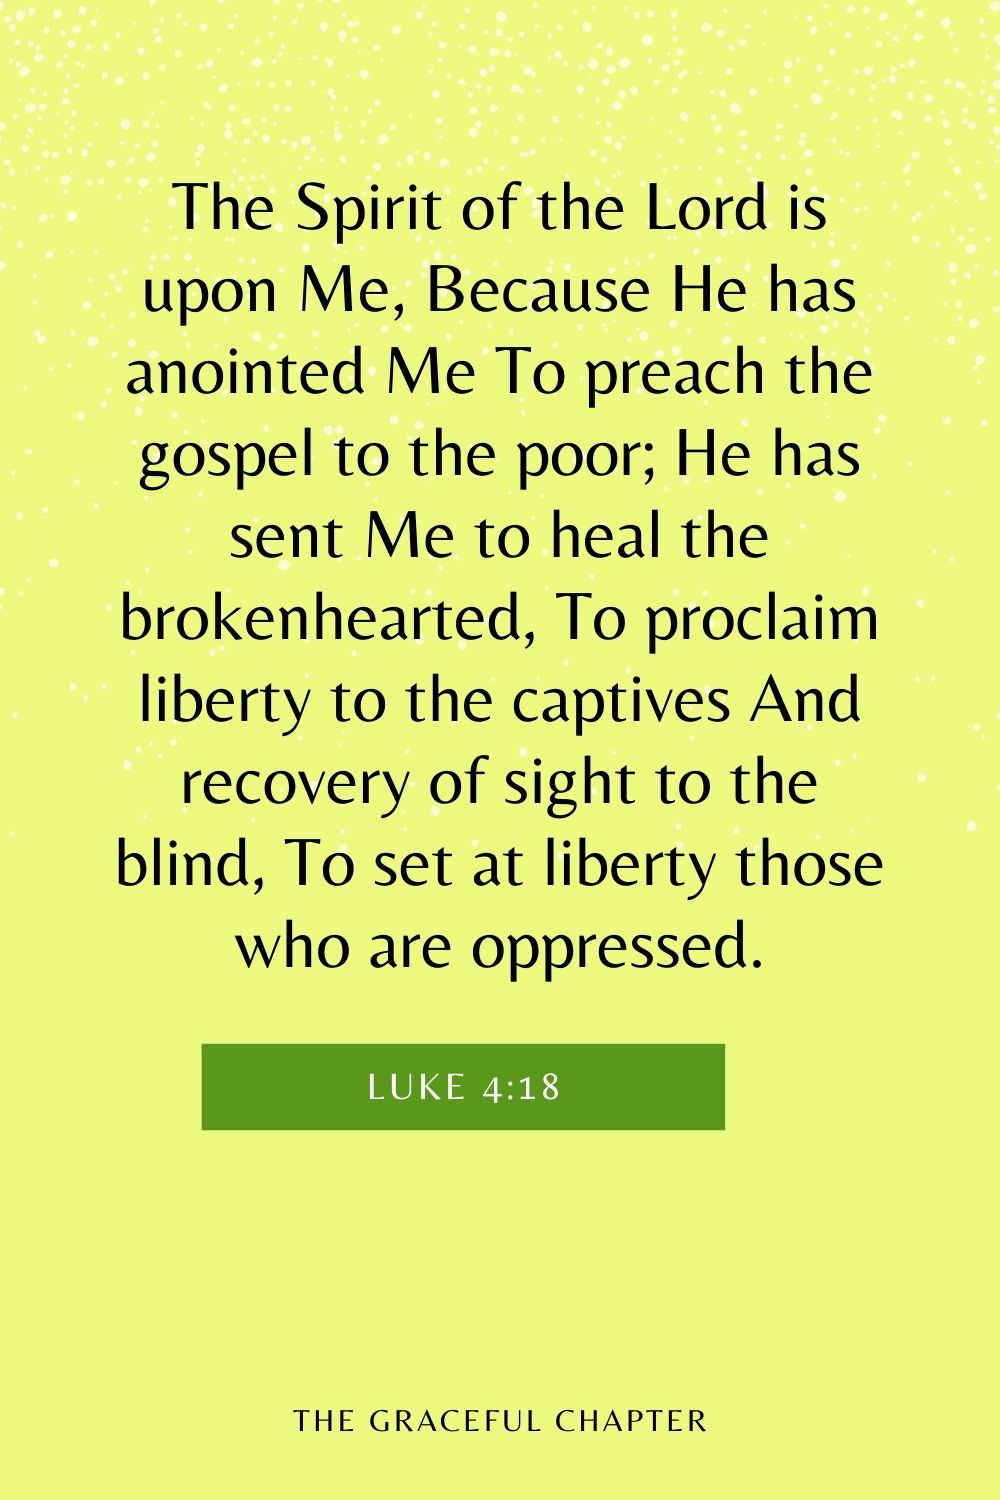 The Spirit of the Lord is upon Me, Because He has anointed Me To preach the gospel to the poor; He has sent Me to heal the brokenhearted, To proclaim liberty to the captives And recovery of sight to the blind, To set at liberty those who are oppressed. Luke 4:18